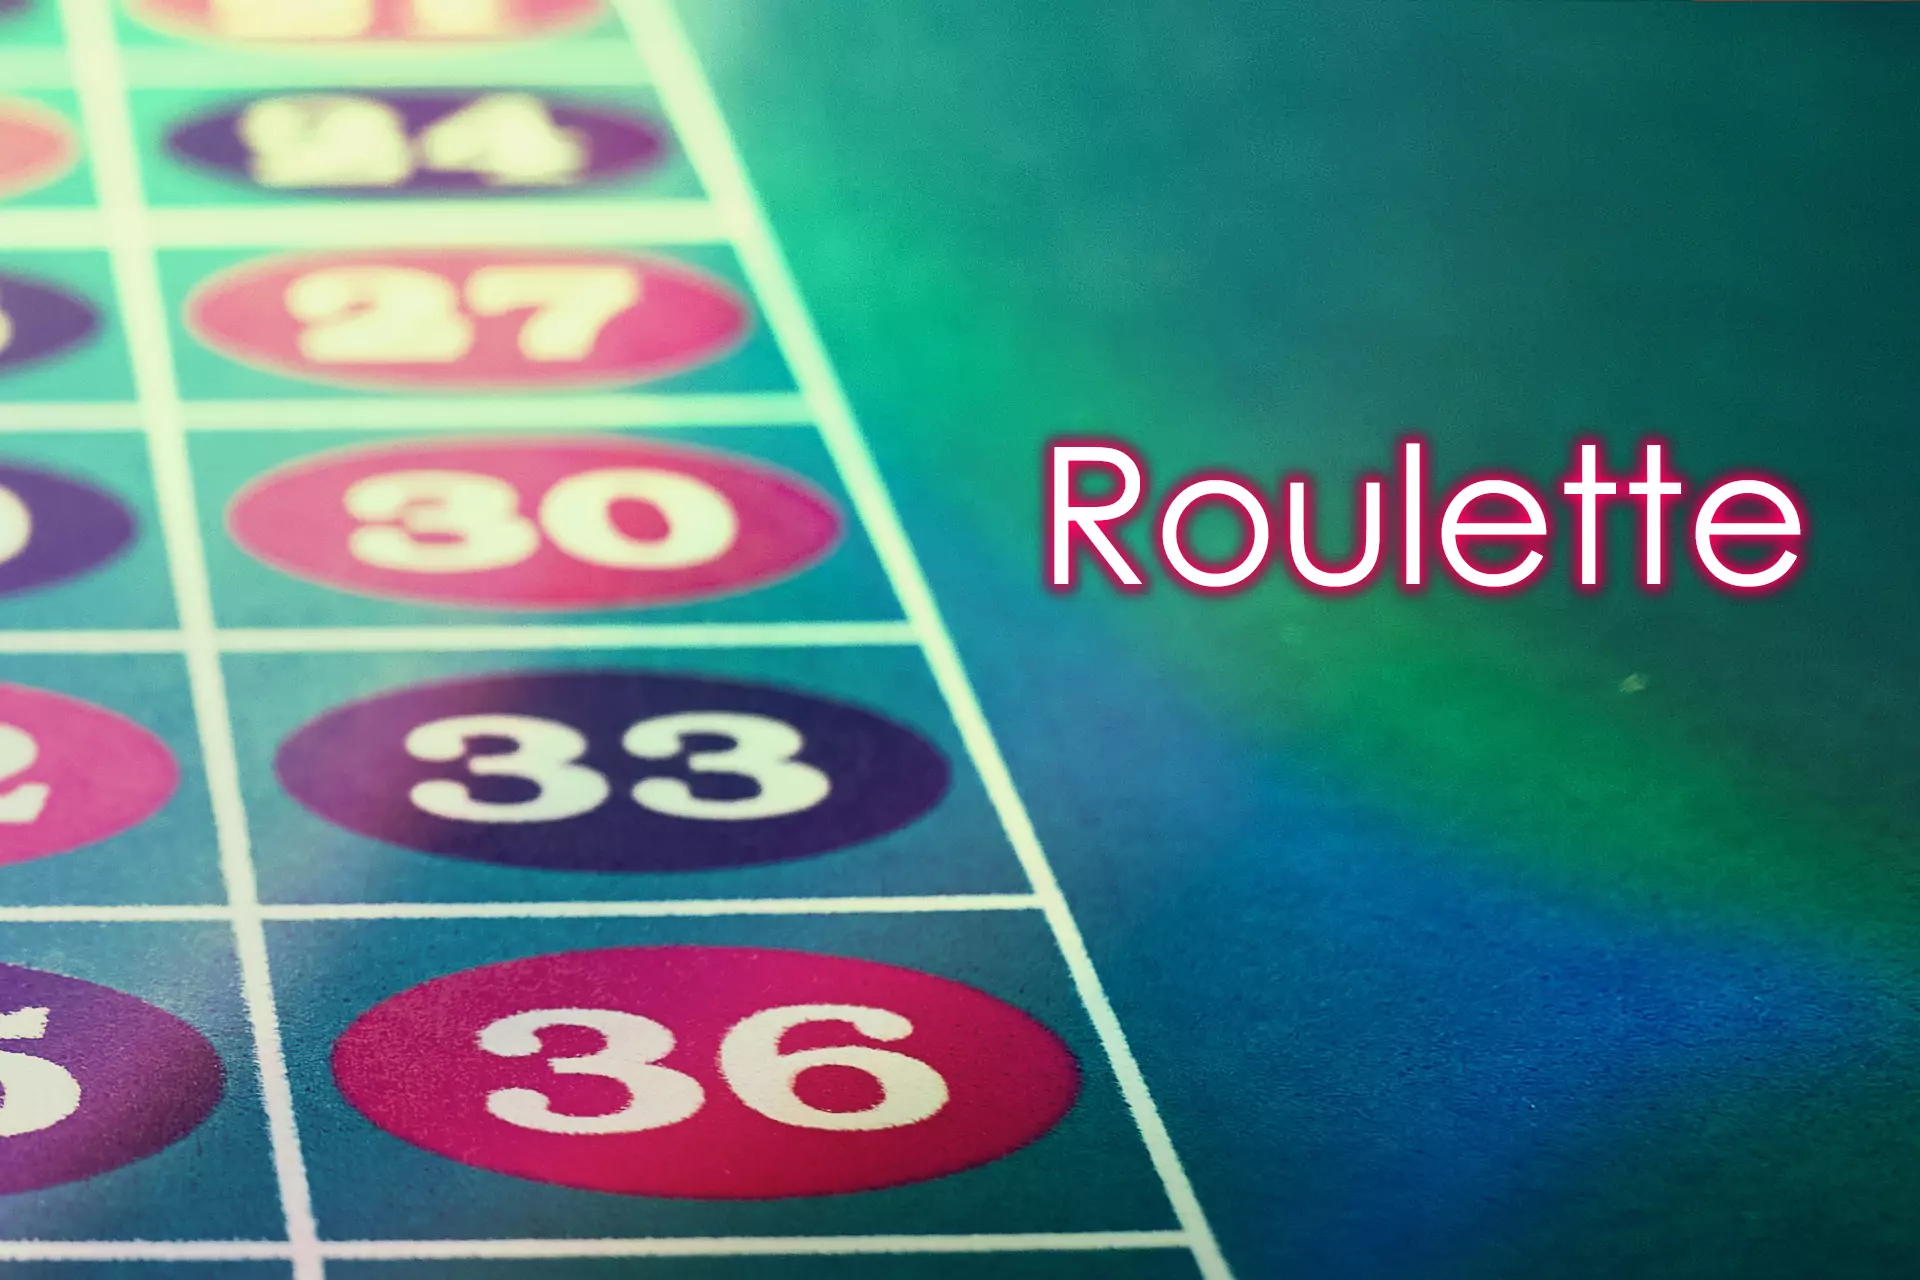 Roulette is one of the oldest and still most popular casino games that has many fans in India as well.